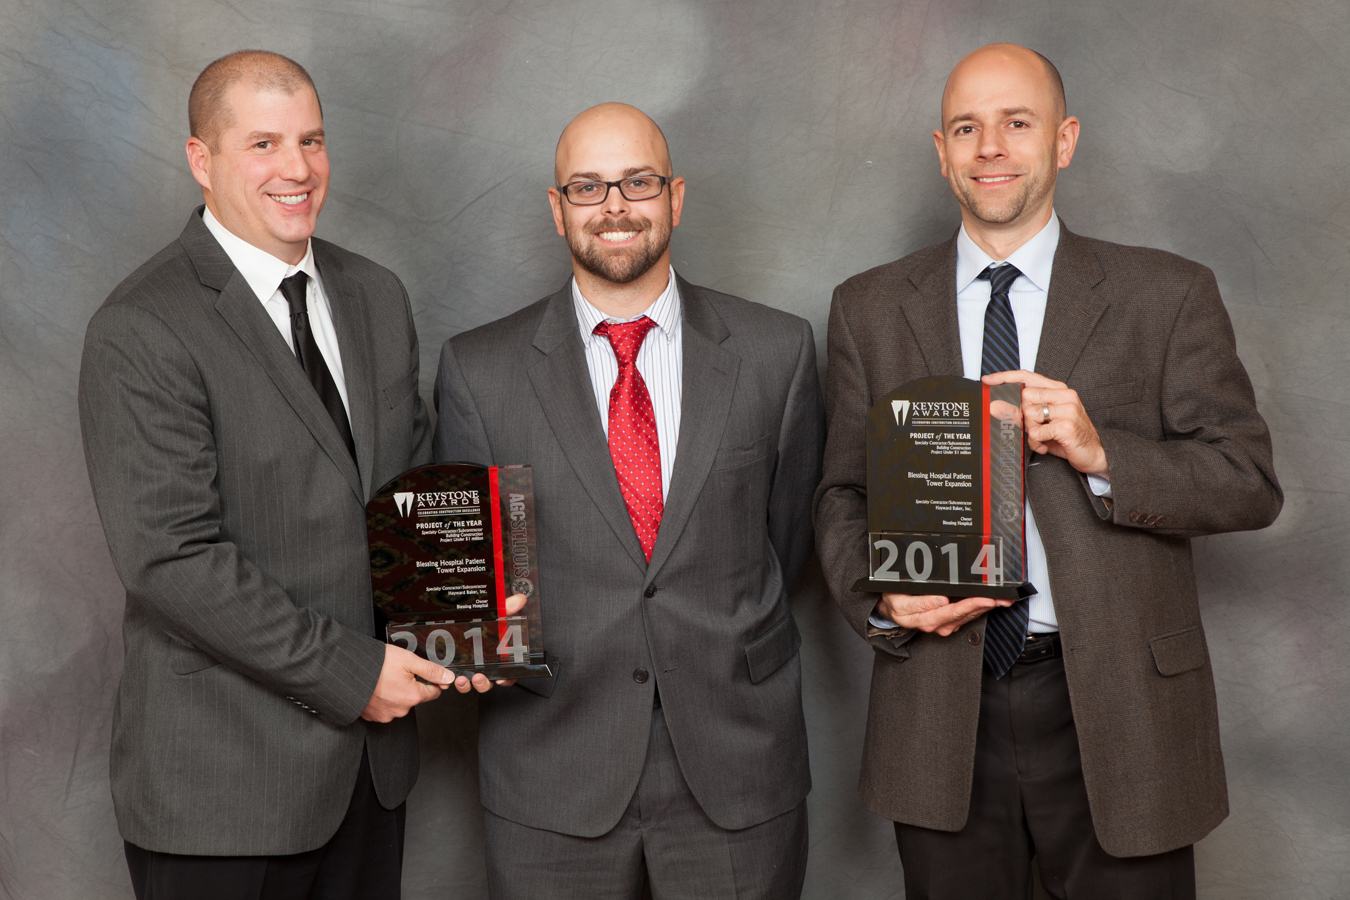 (L-R)  Senior Engineer Jeffrey R. Hill, PE, Project Engineer Dan Weingart, and area Manager Gregory A. Terri, PE of Hayward Baker's St. Louis area office were presented AGC's Keystone Award for 2014.